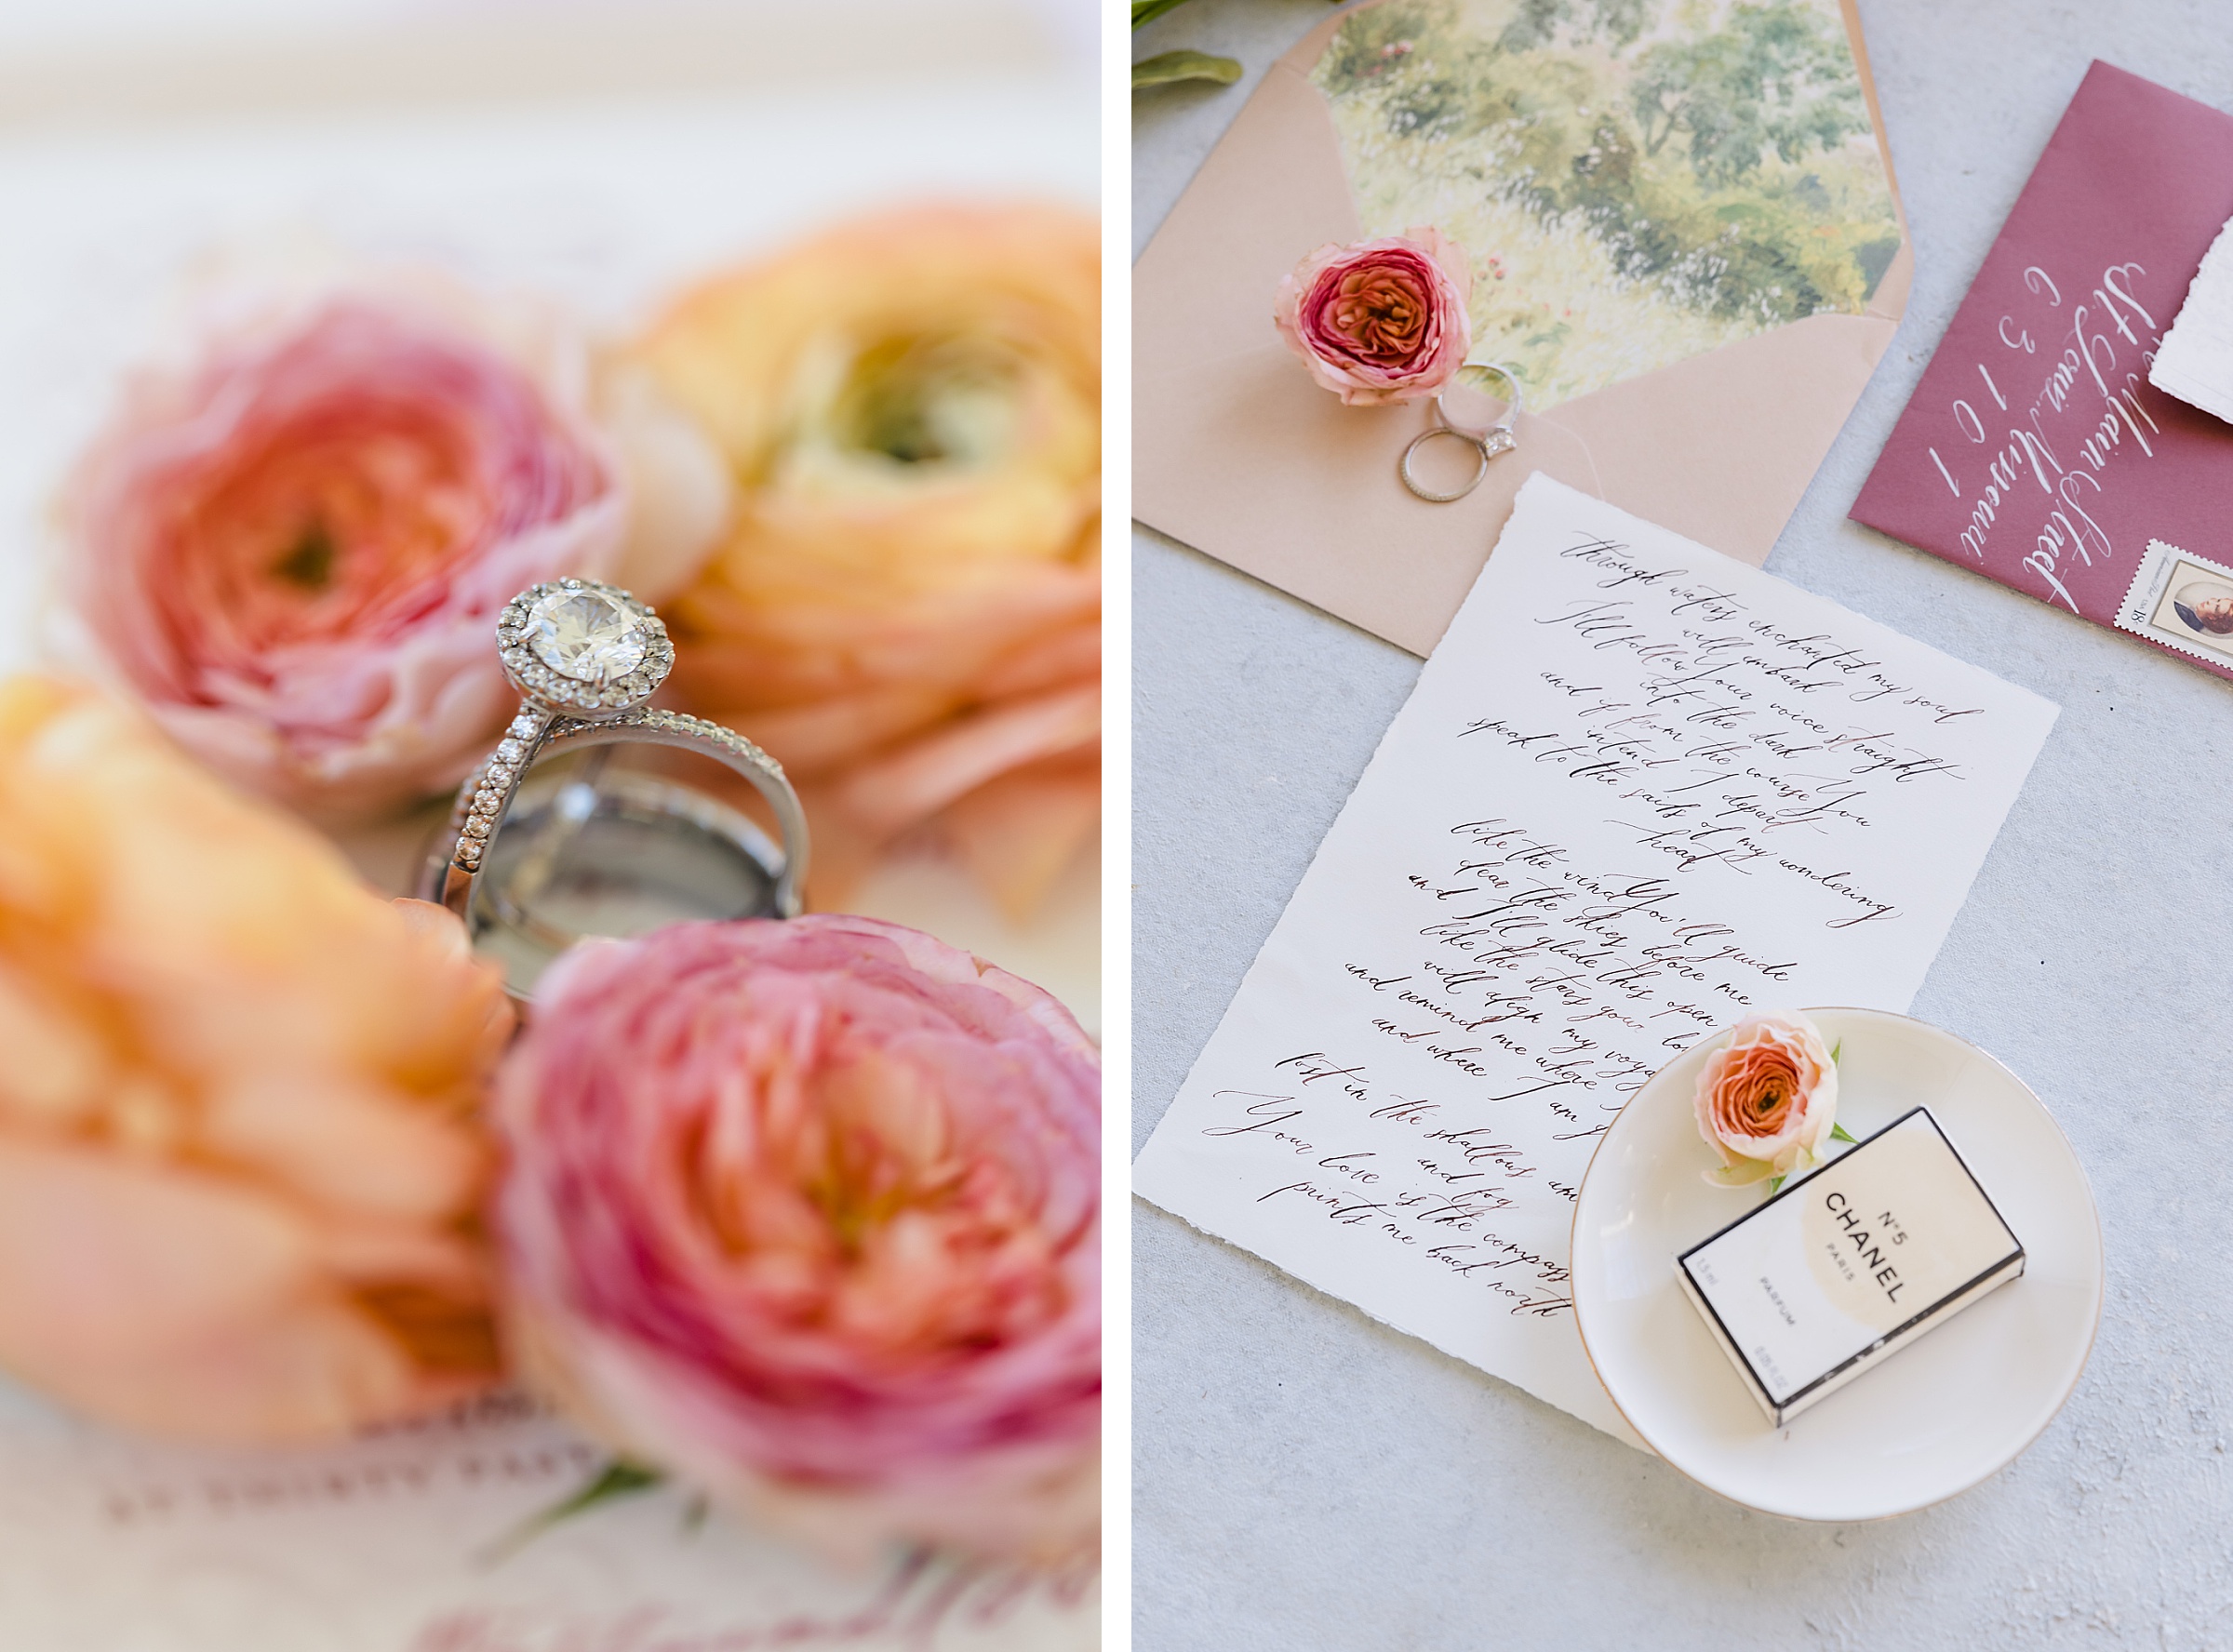 Wedding details at the Westwind Hills venue in Pacific, Missouri.